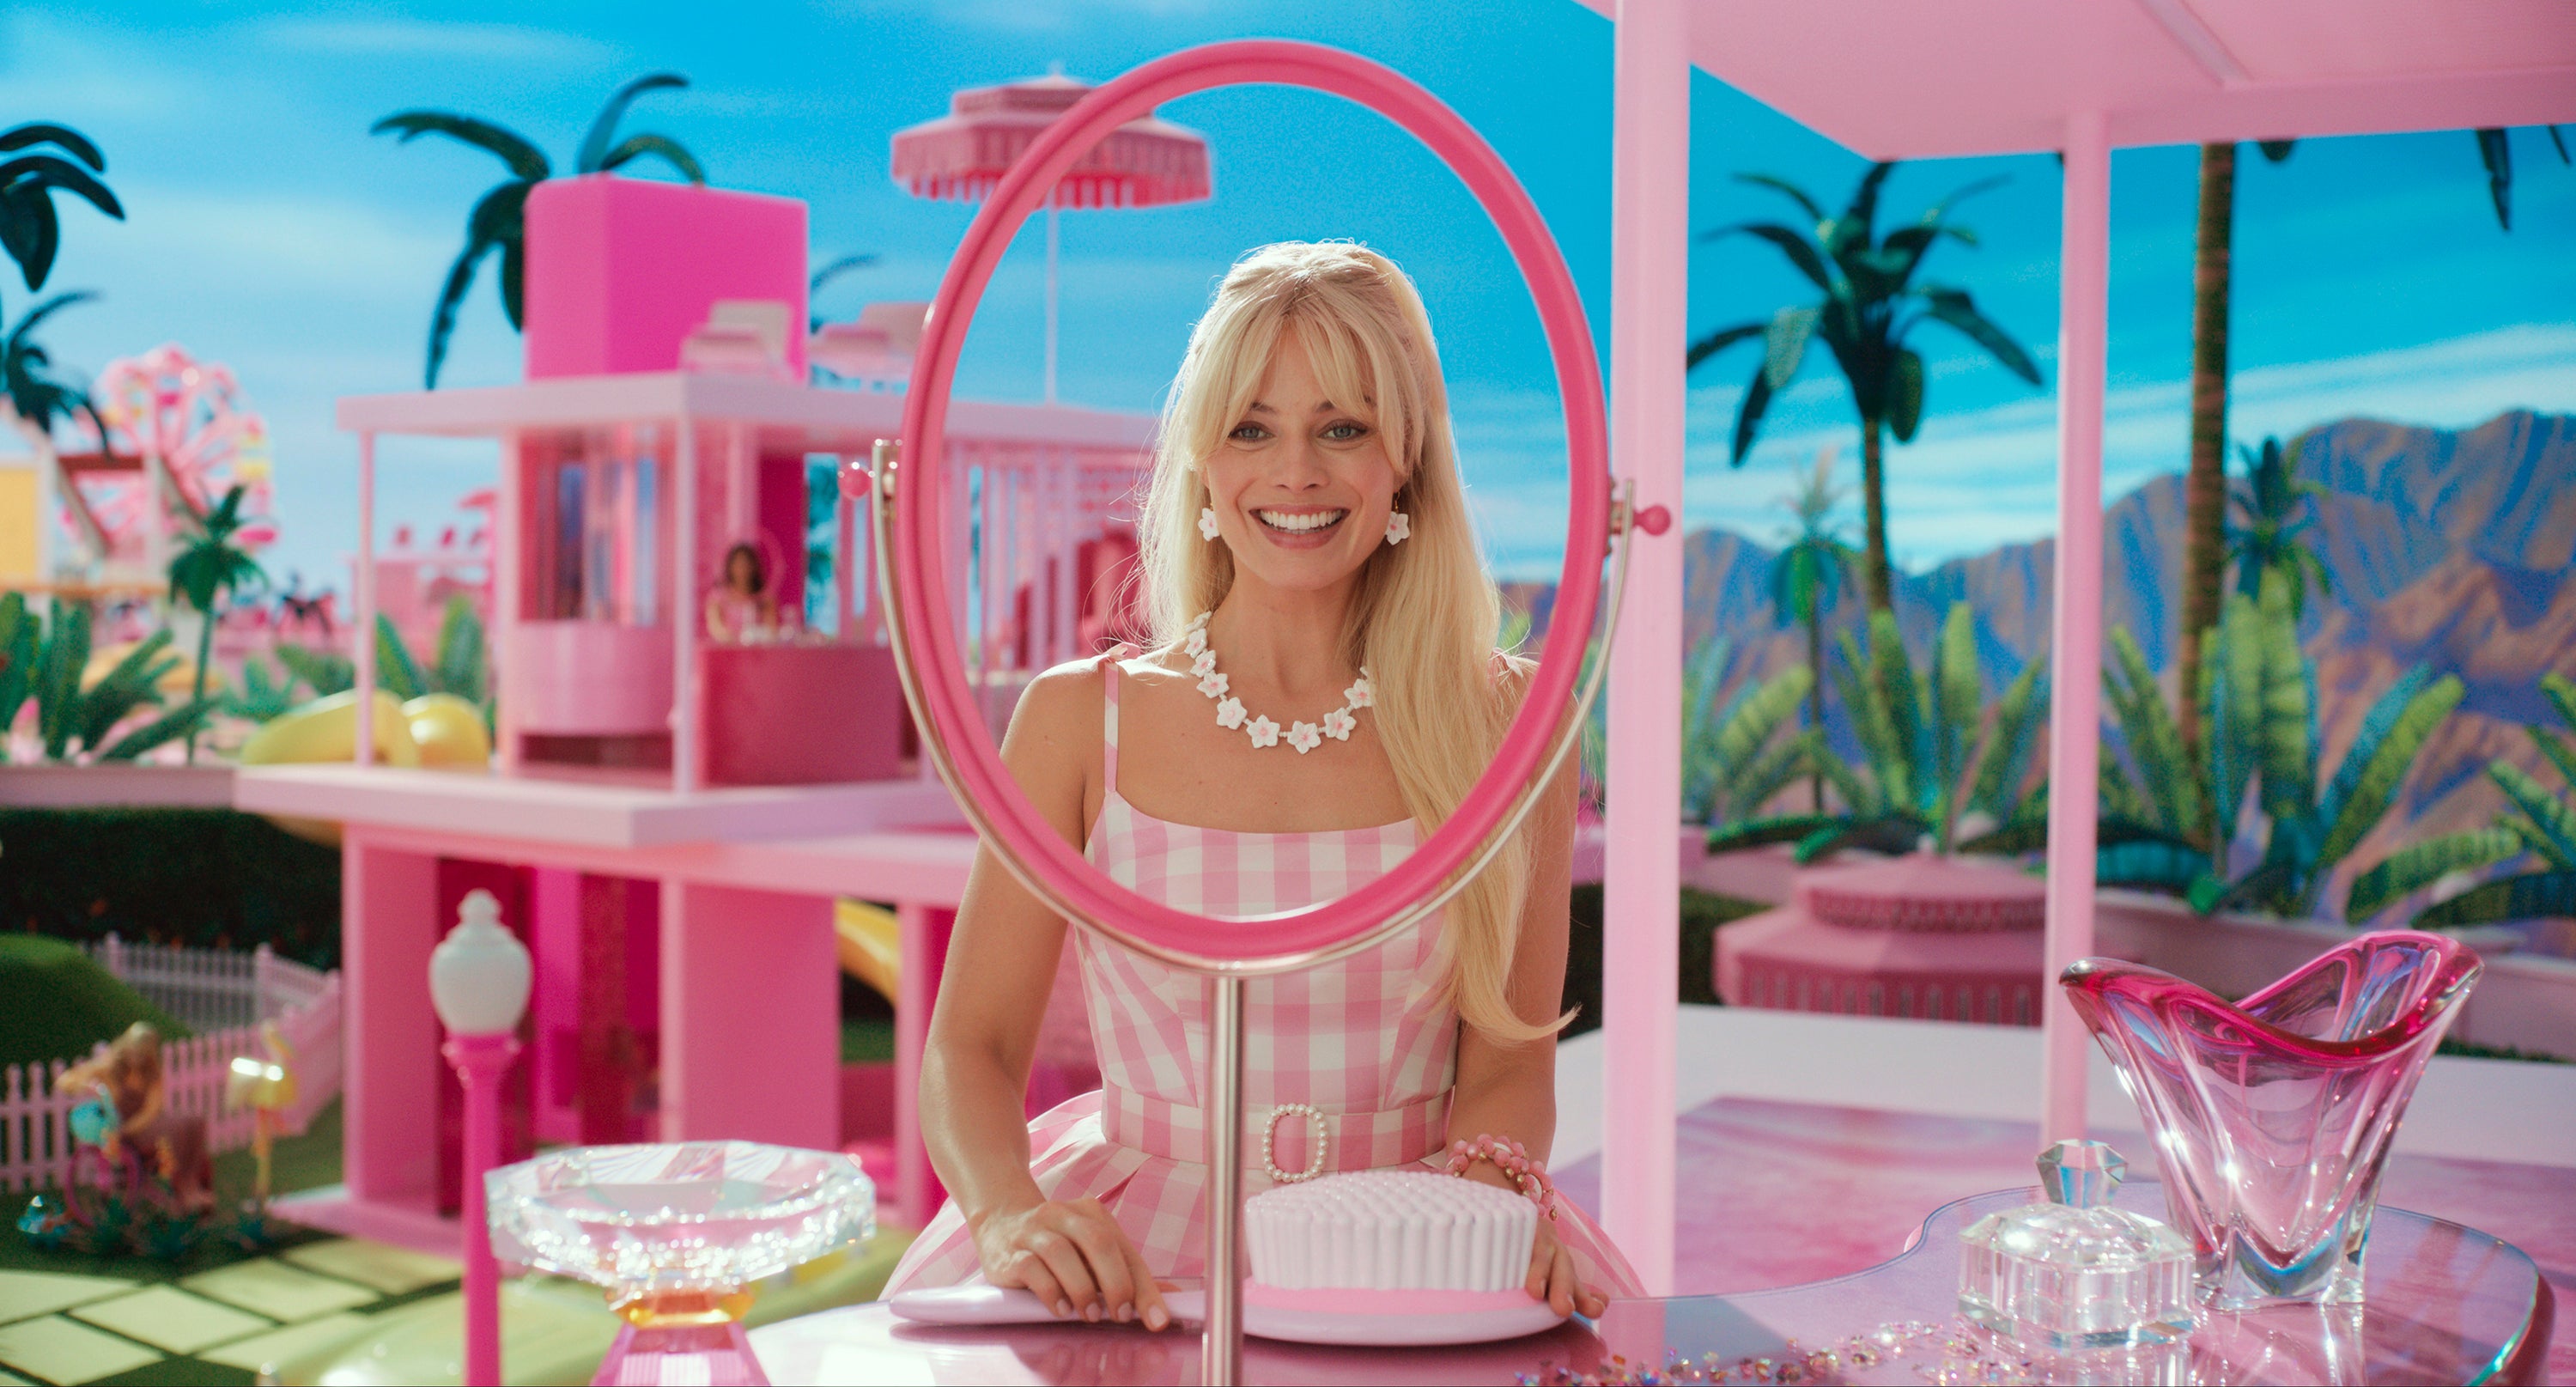 Margot Robbie gave a tour of the Barbie house